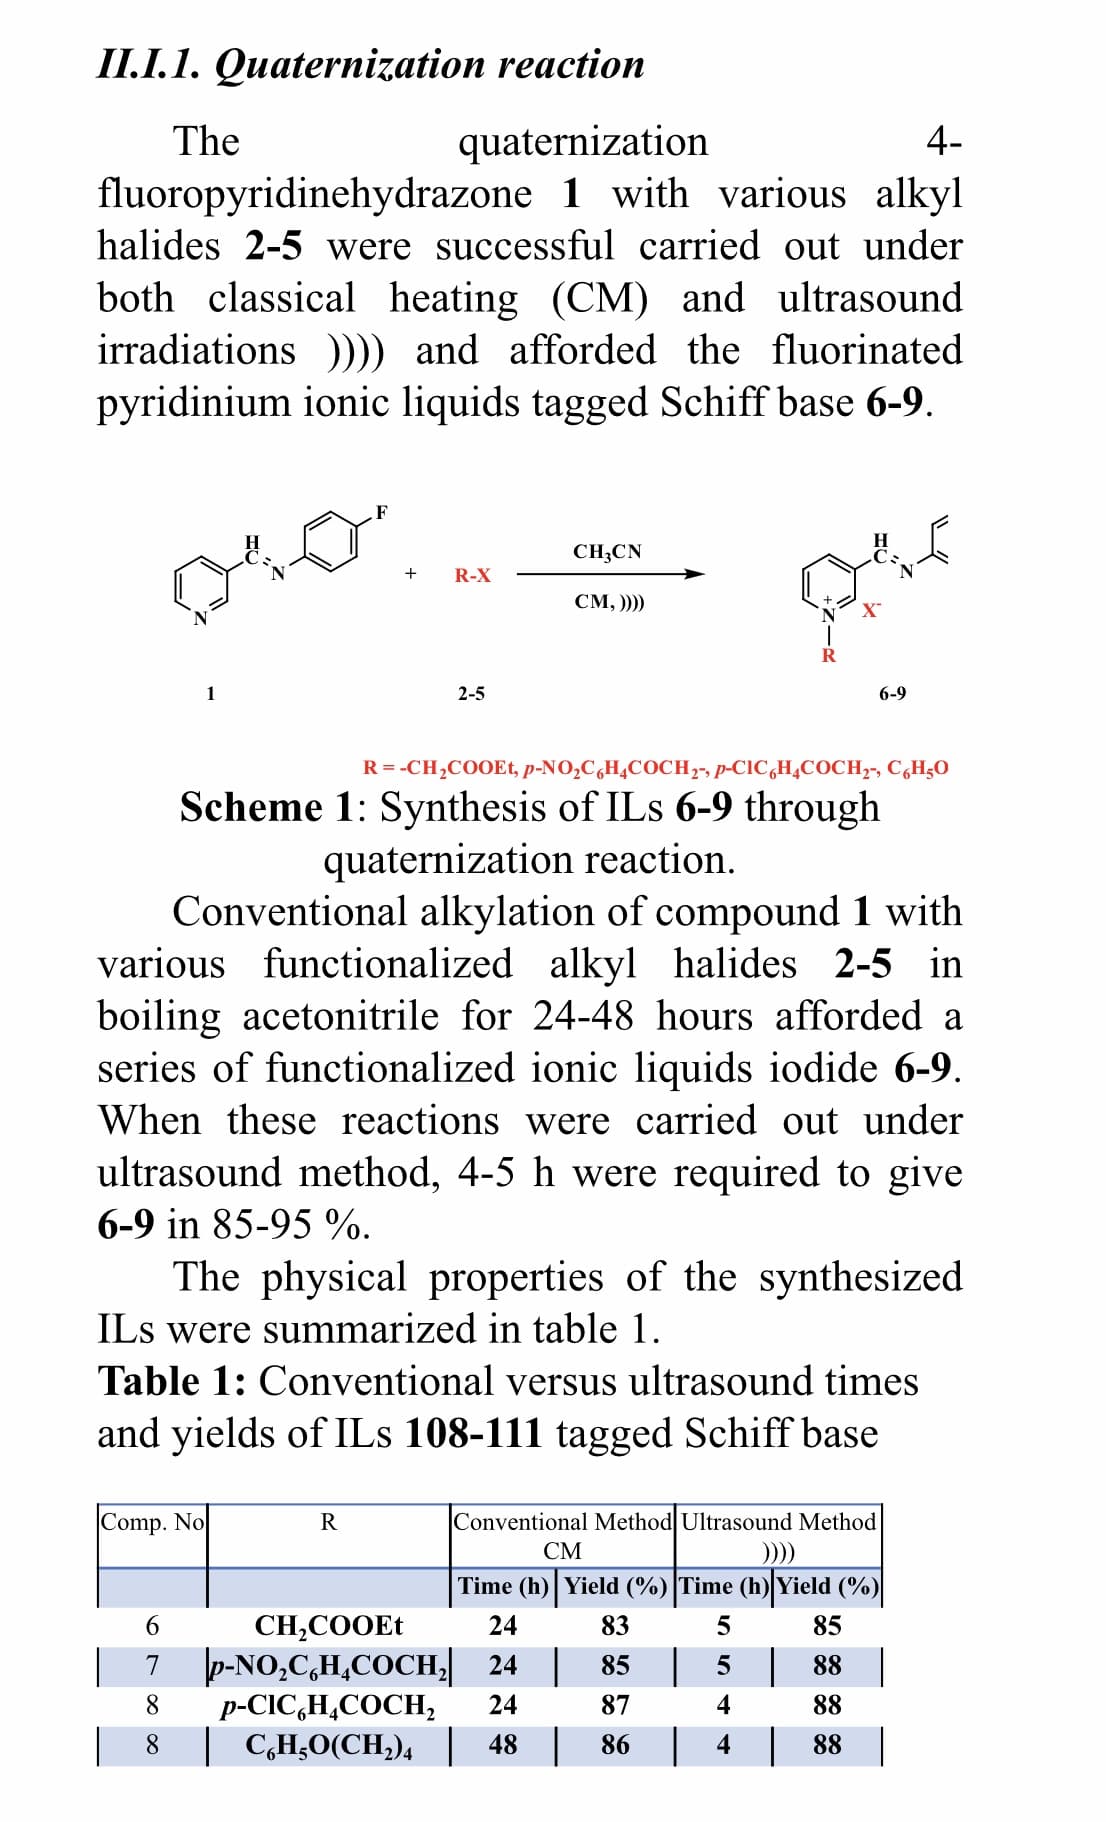 II.I.1. Quaternization reaction
quaternization
fluoropyridinehydrazone 1 with various alkyl
halides 2-5 were successful carried out under
The
4-
both classical heating (CM) and ultrasound
irradiations ))) and afforded the fluorinated
pyridinium ionic liquids tagged Schiff base 6-9.
F
CH;CN
R-X
CM, ))))
1
2-5
6-9
R = -CH,COOEt, p-NO,C,H¾COCH,-, p-CIC,H¿COCH,-, C,H;O
Scheme 1: Synthesis of ILs 6-9 through
quaternization reaction.
Conventional alkylation of compound 1 with
various functionalized alkyl halides 2-5 in
boiling acetonitrile for 24-48 hours afforded a
series of functionalized ionic liquids iodide 6-9.
When these reactions were carried out under
ultrasound method, 4-5 h were required to give
6-9 in 85-95 %.
The physical properties of the synthesized
ILs were summarized in table 1.
Table 1: Conventional versus ultrasound times
and yields of ILs 108-111 tagged Schiff base
Comp. No
R
Conventional Method Ultrasound Method
СМ
Time (h) Yield (%) Time (h) Yield (%)
6.
CH,COOET
7 p-NO,C,H,COCH 24 | 85 | 5 | 88
p-CIC,H,COCH,
24
83
85
8
24
87
88
8.
| C,H;O(CH,)4 48 86 4 88
